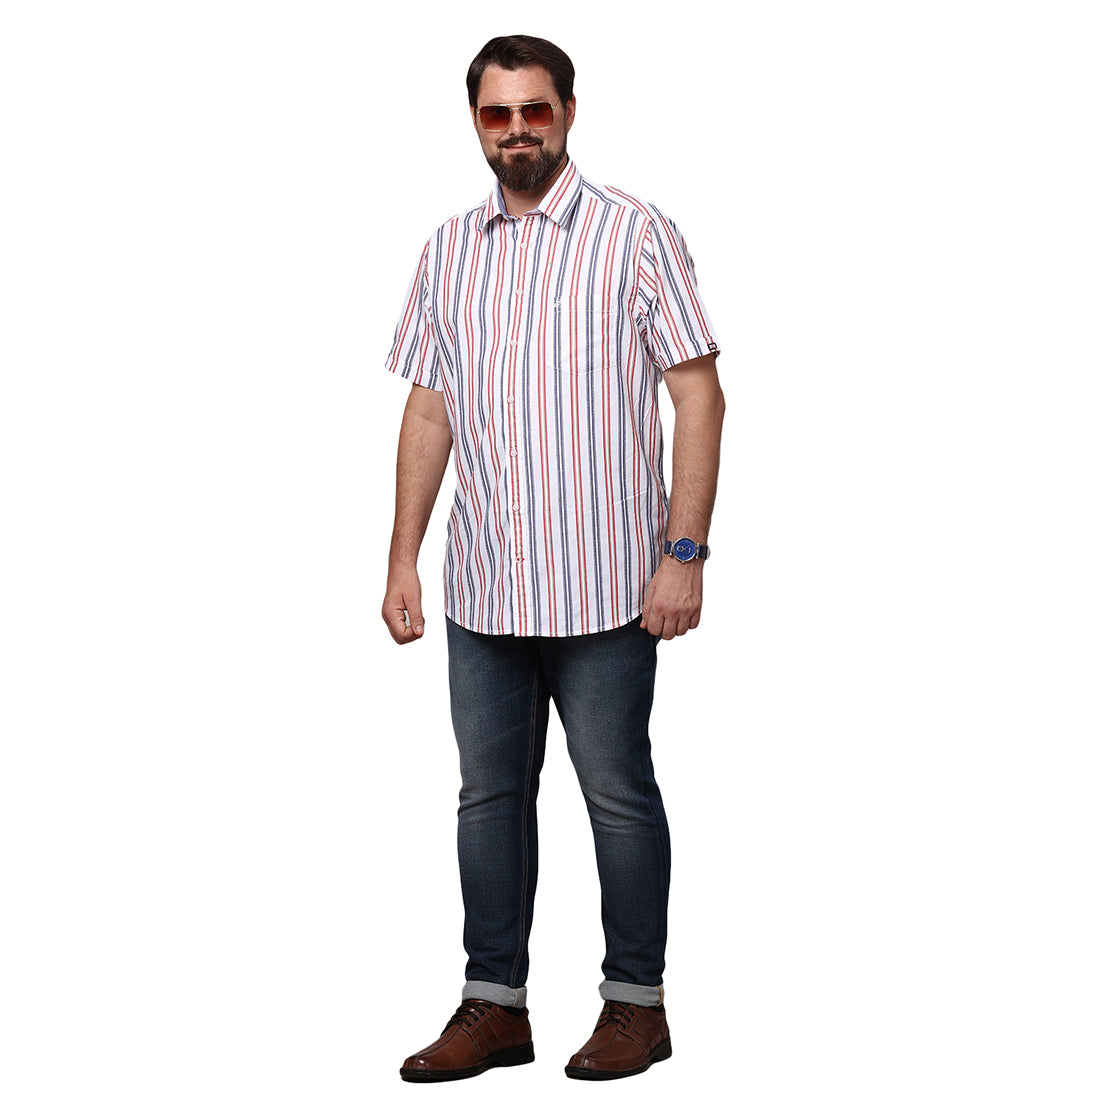 Big & Bold Stripes Multi Full Sleeves Slim Fit Casual Shirts (Plus Size) - Double Two